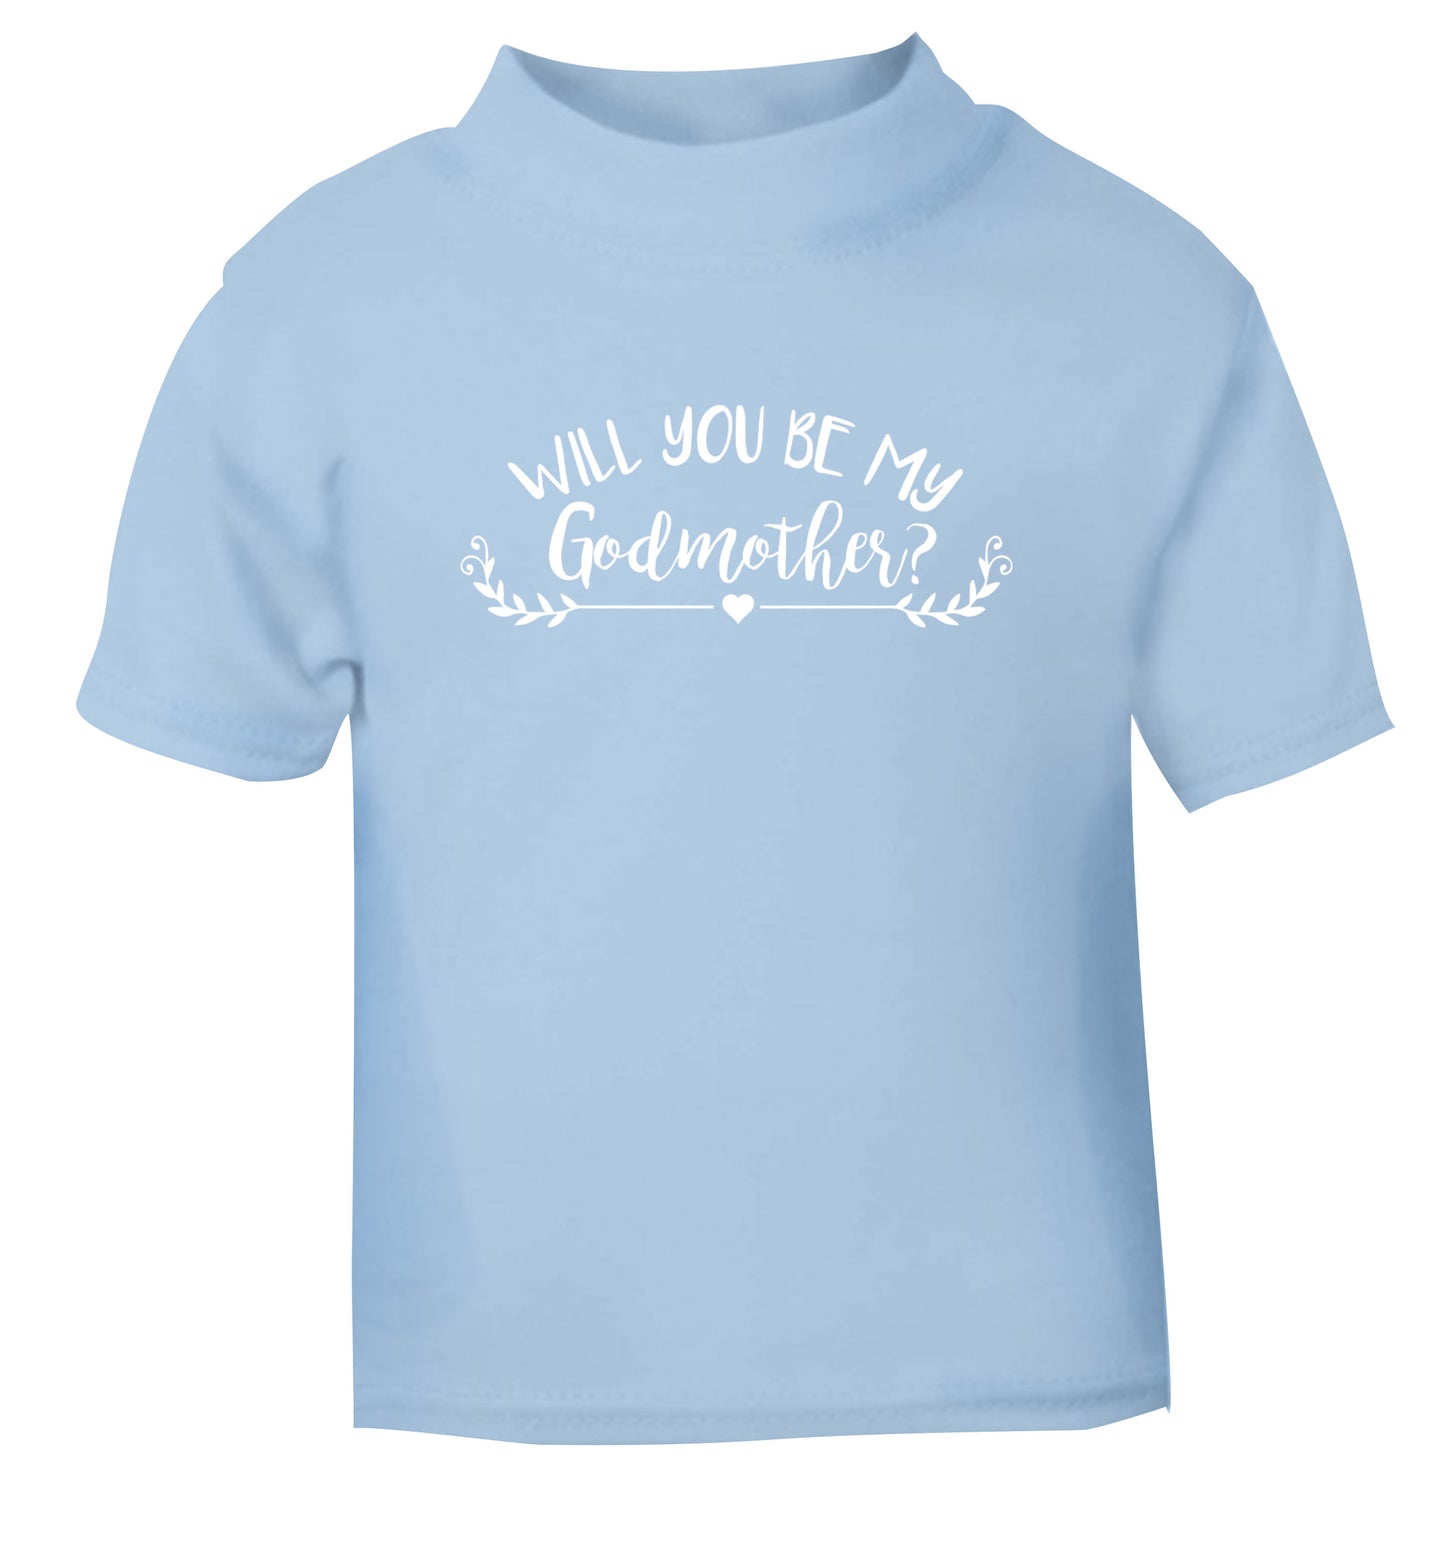 Will you be my godmother? light blue Baby Toddler Tshirt 2 Years